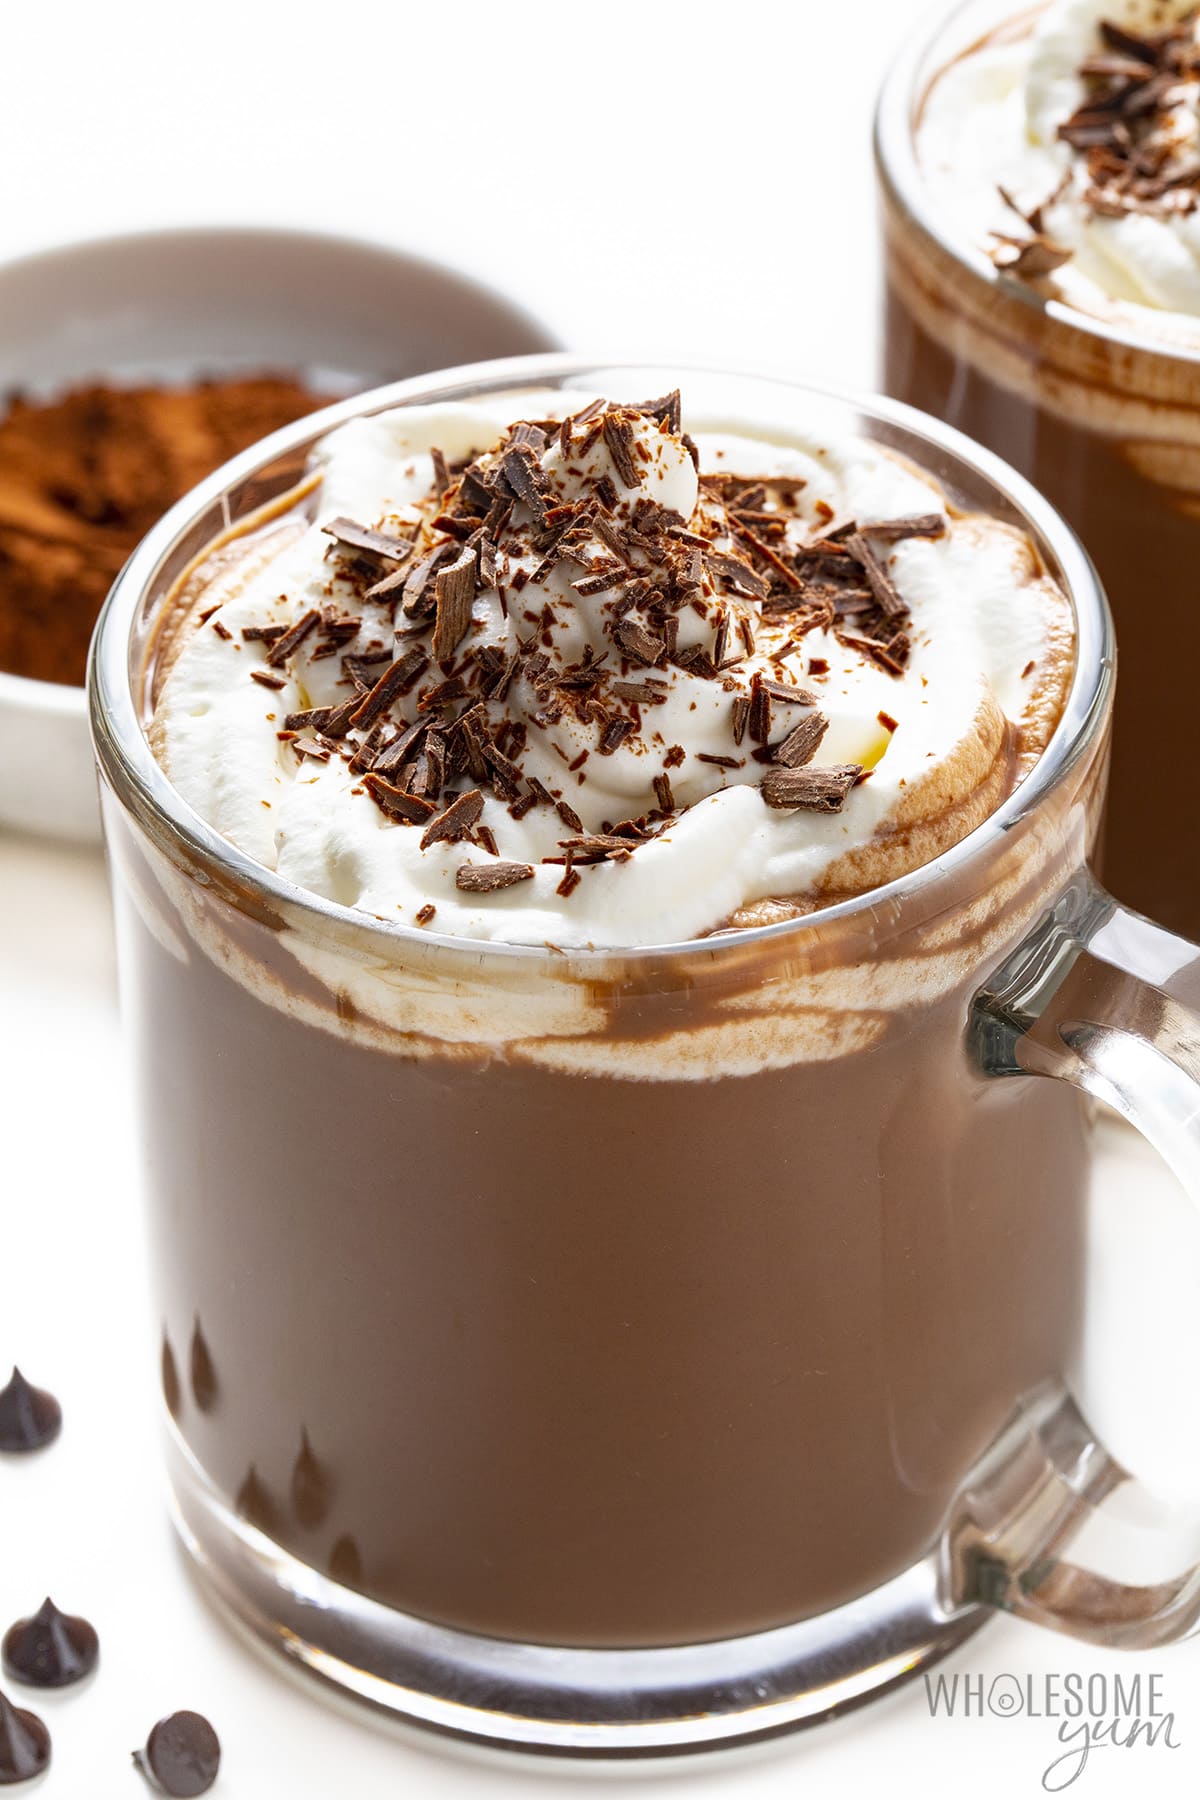 Sugar-free hot chocolate in mugs with whipped cream and chocolate shavings.